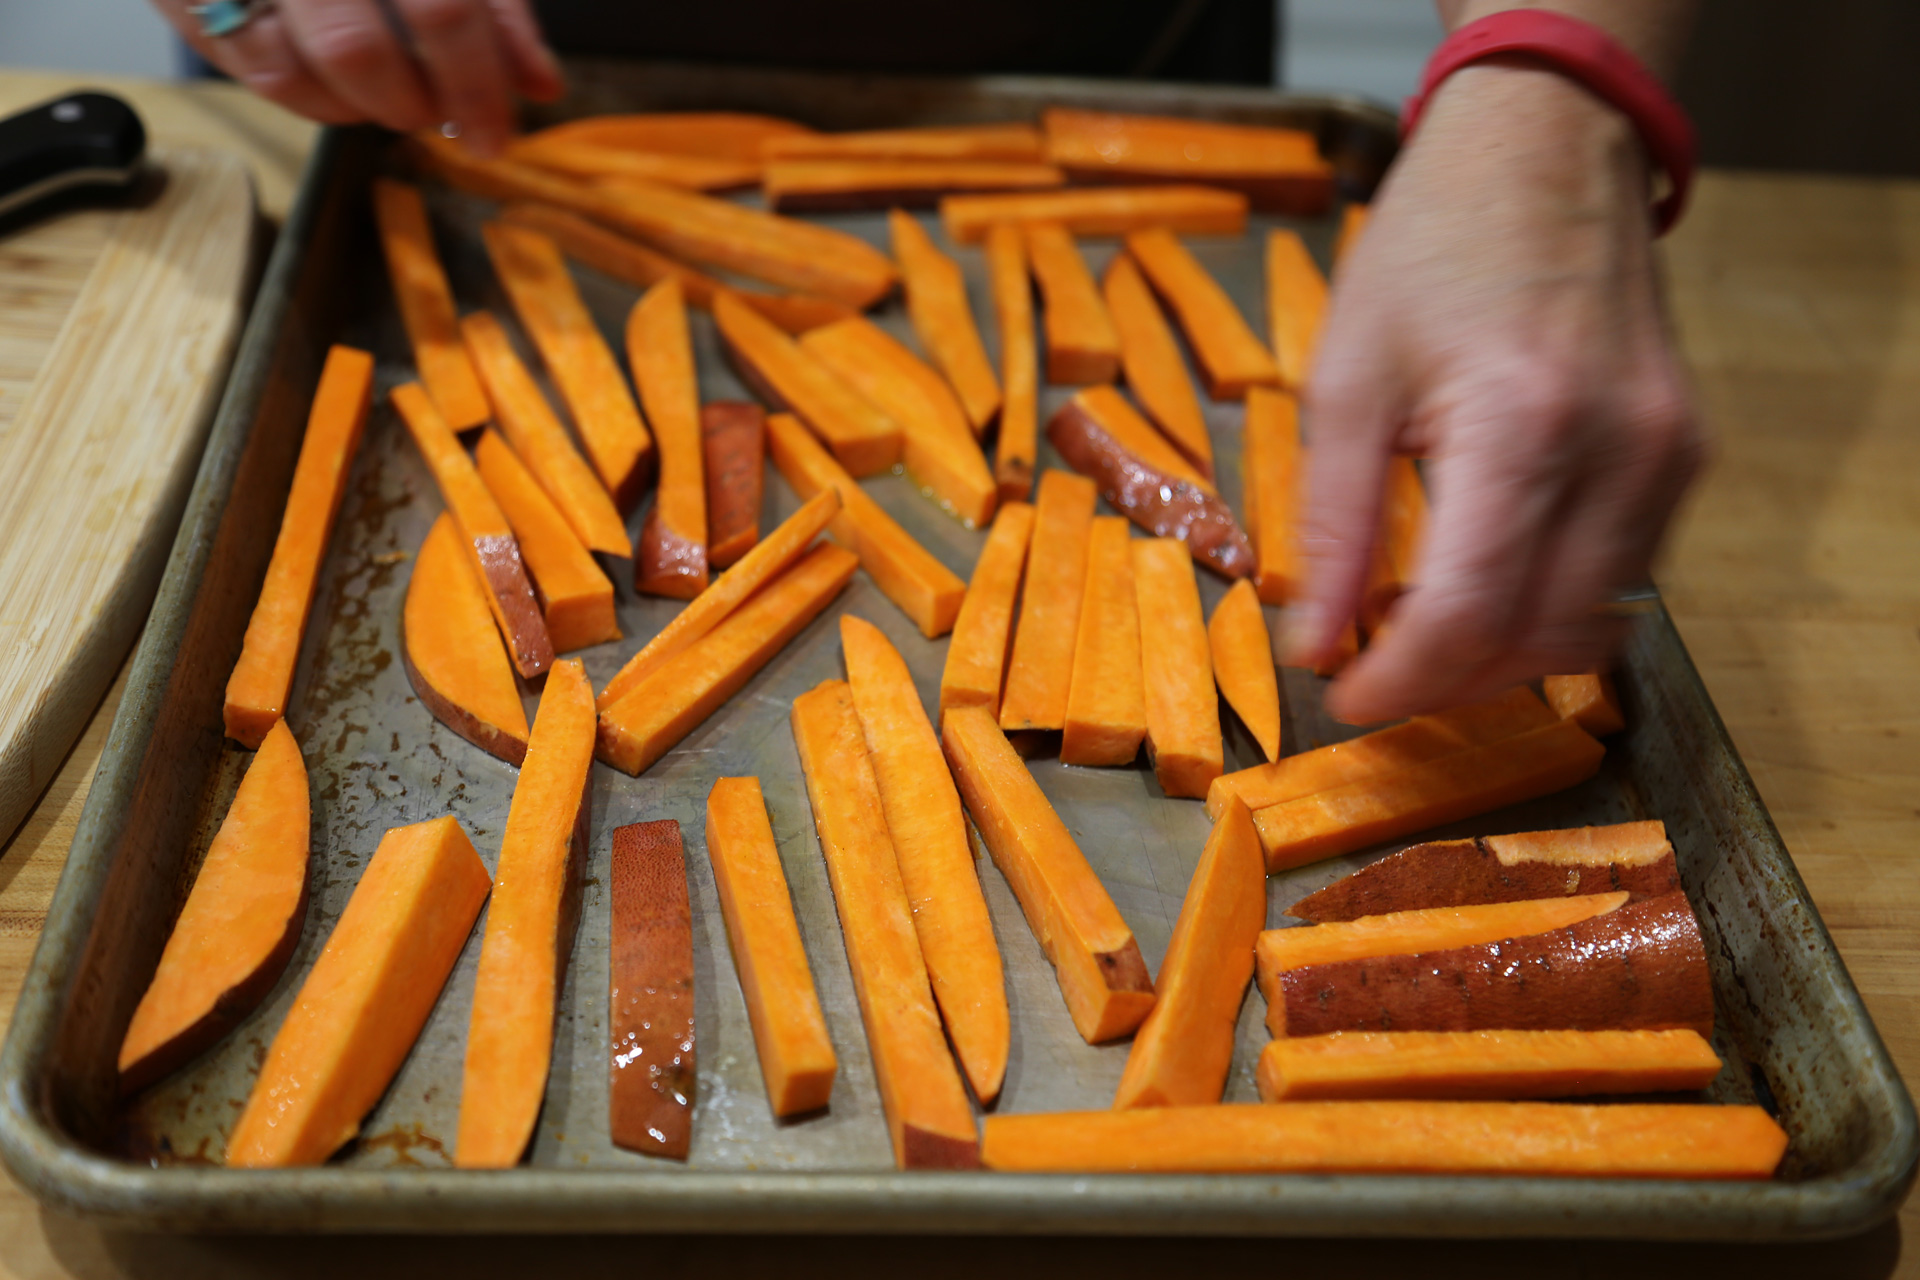 Spread the sweet potatoes out on the baking sheet in an even layer (if they overlap, they will steam and won’t come out as crisp and caramelized).